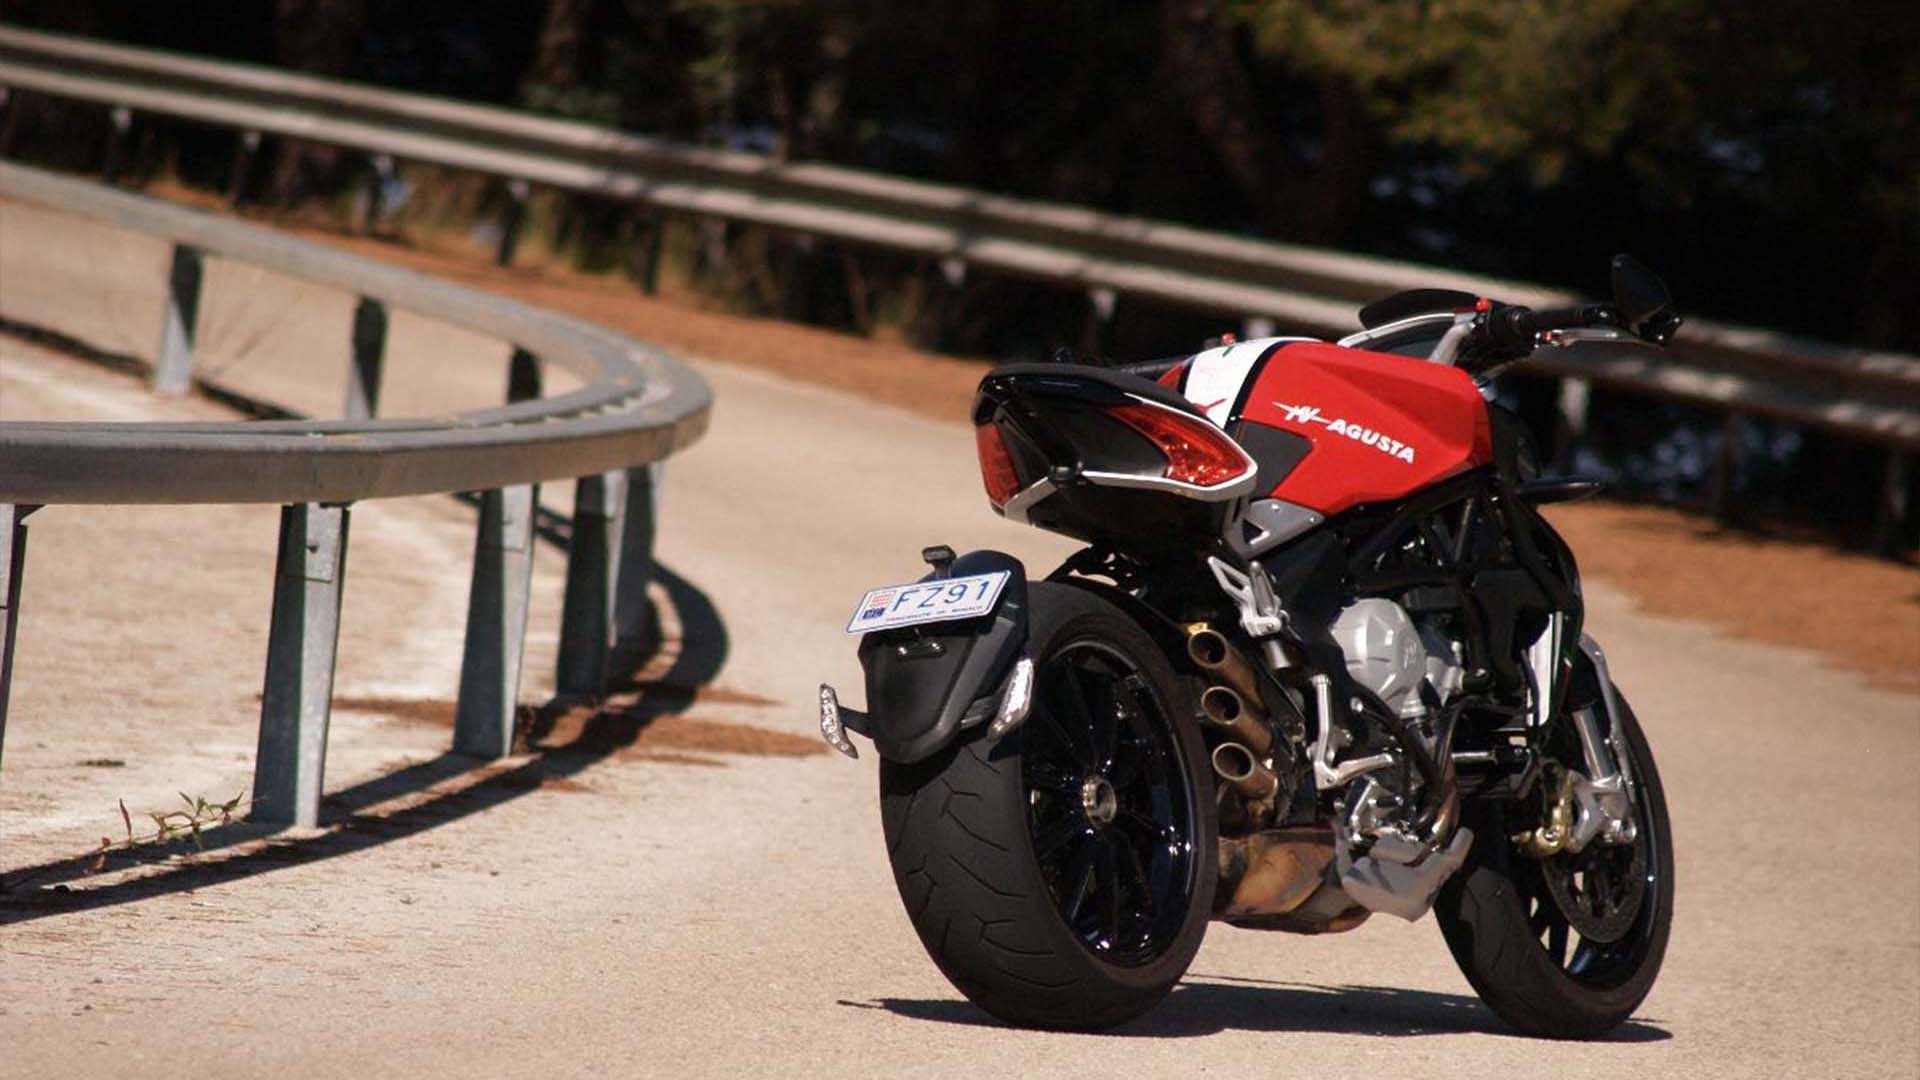 MV Agusta Brutale Rosso, Stunning wallpapers, Captivating design, Motorcycle enthusiasts, 1920x1080 Full HD Desktop